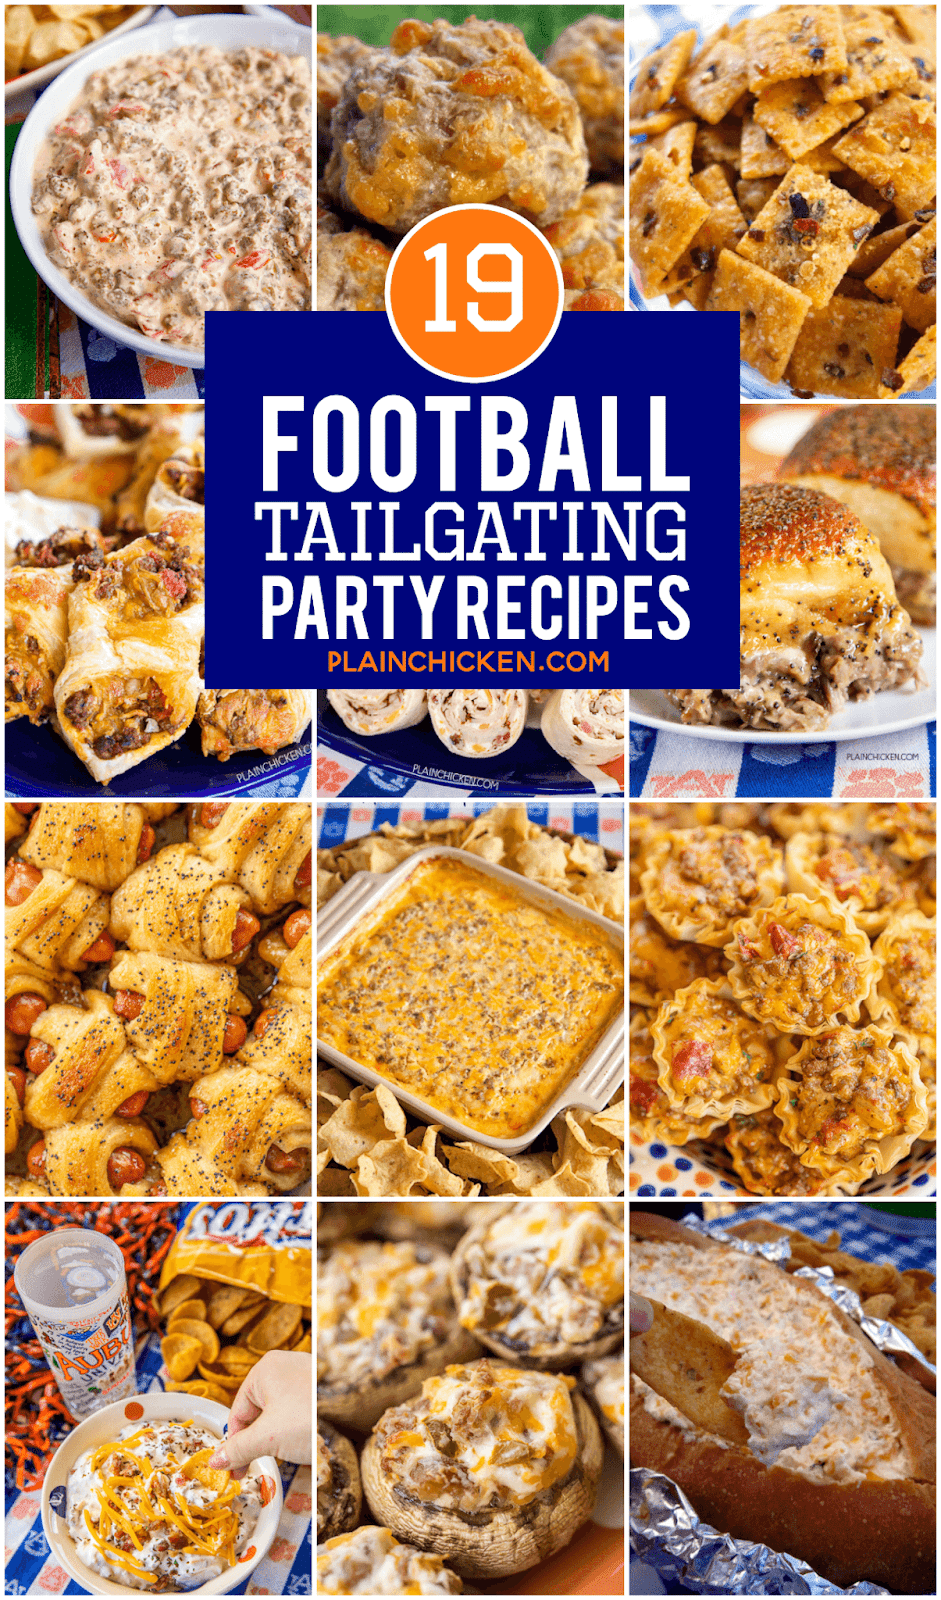 Tailgating Party Recipes for Football Season | Plain Chicken®